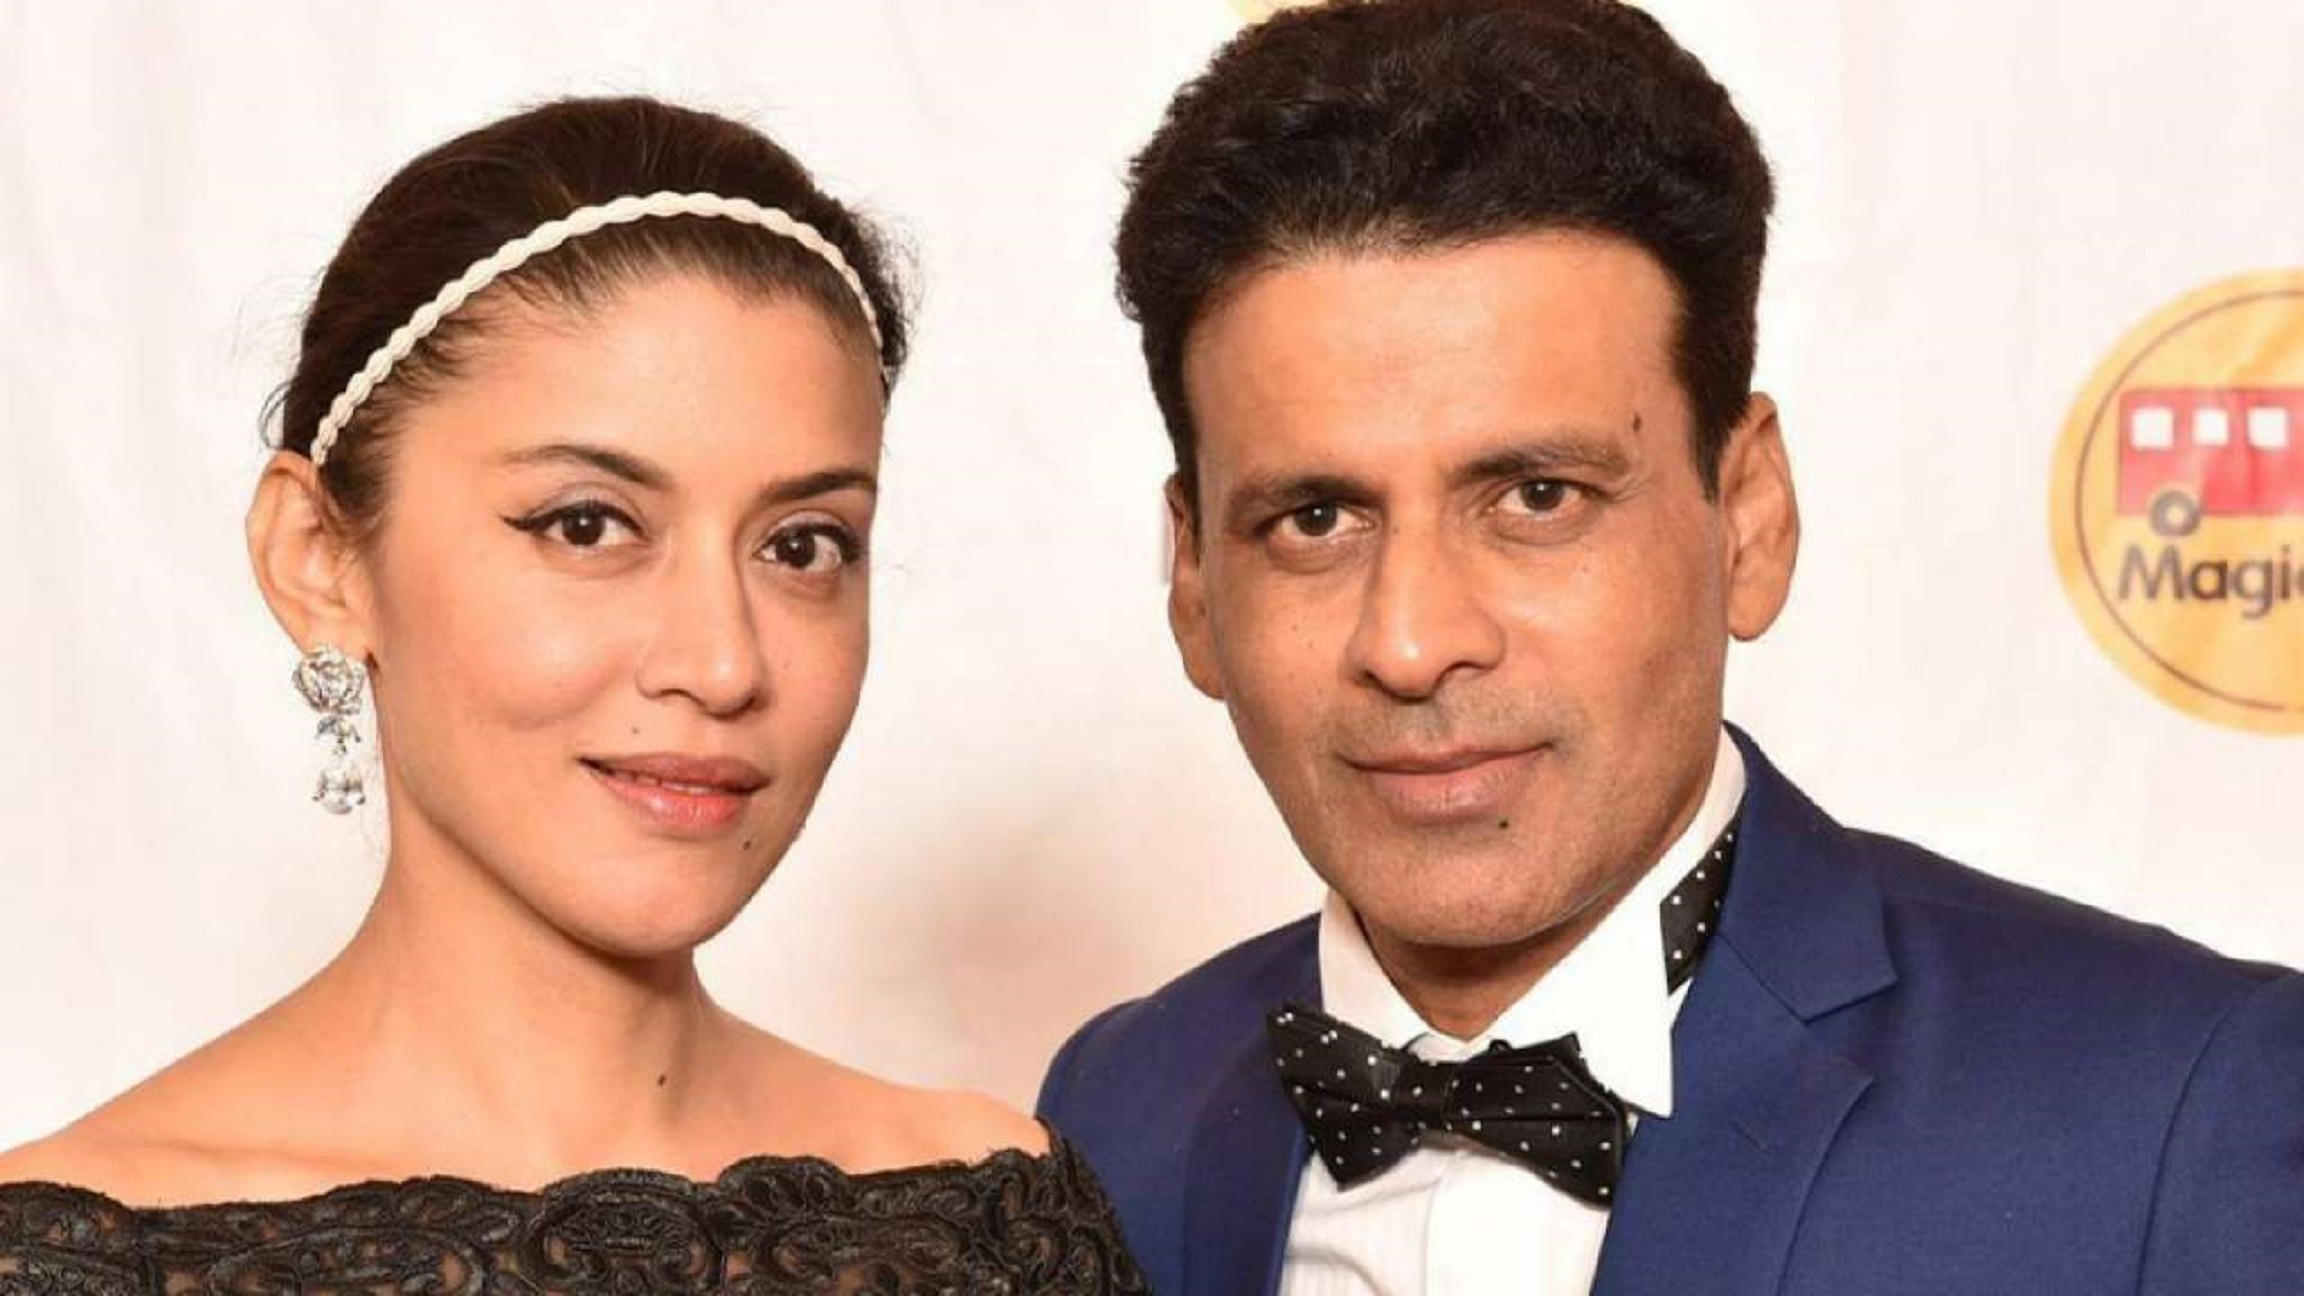 Manoj Bajpayee Fell In Love With His Wife’s ‘Saadgi’ In First Meeting, “She Came With Oily Hair At A Party”